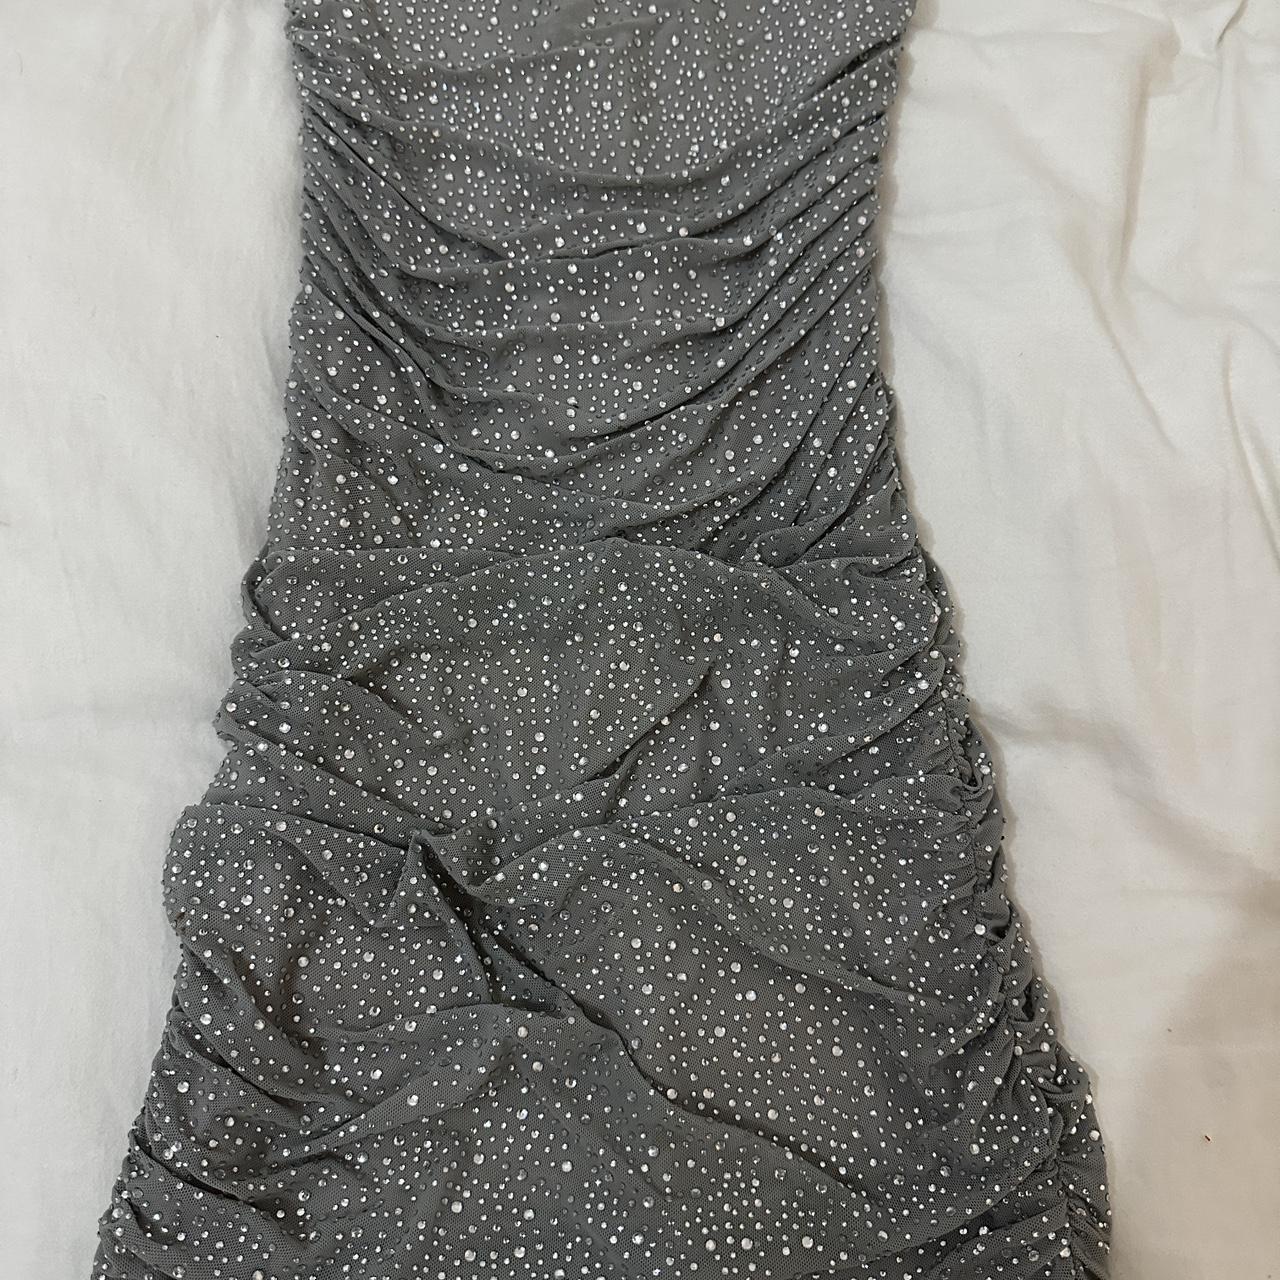 oh polly silver glittery dress worn once size 8 - Depop